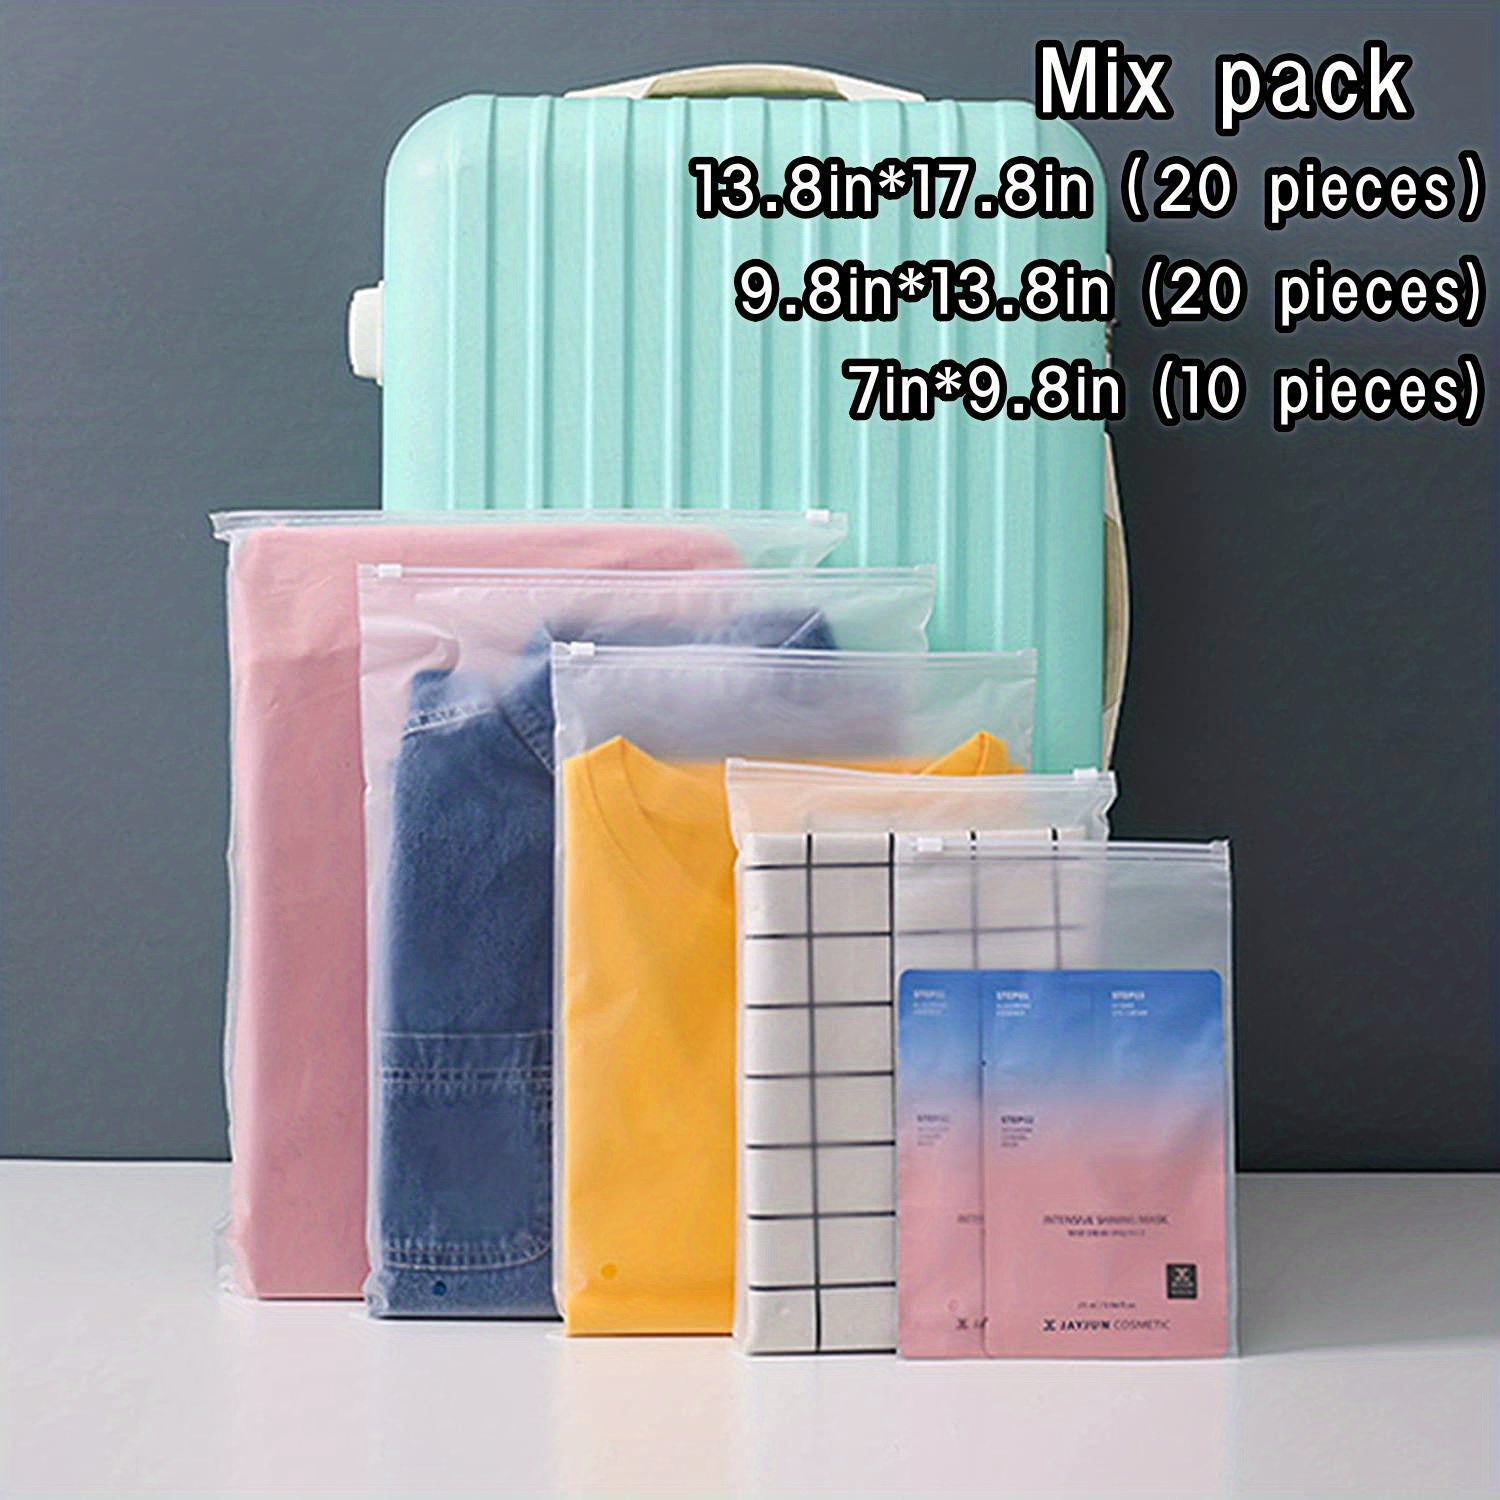 12 Pcs Matte Frosted Travel Storage Bag Reusable Zip-lock Seal Storage Bag  Luggage Clothes Shoes Makeup Packing Pouch Organizer (4 Large, 4 Medium, 4